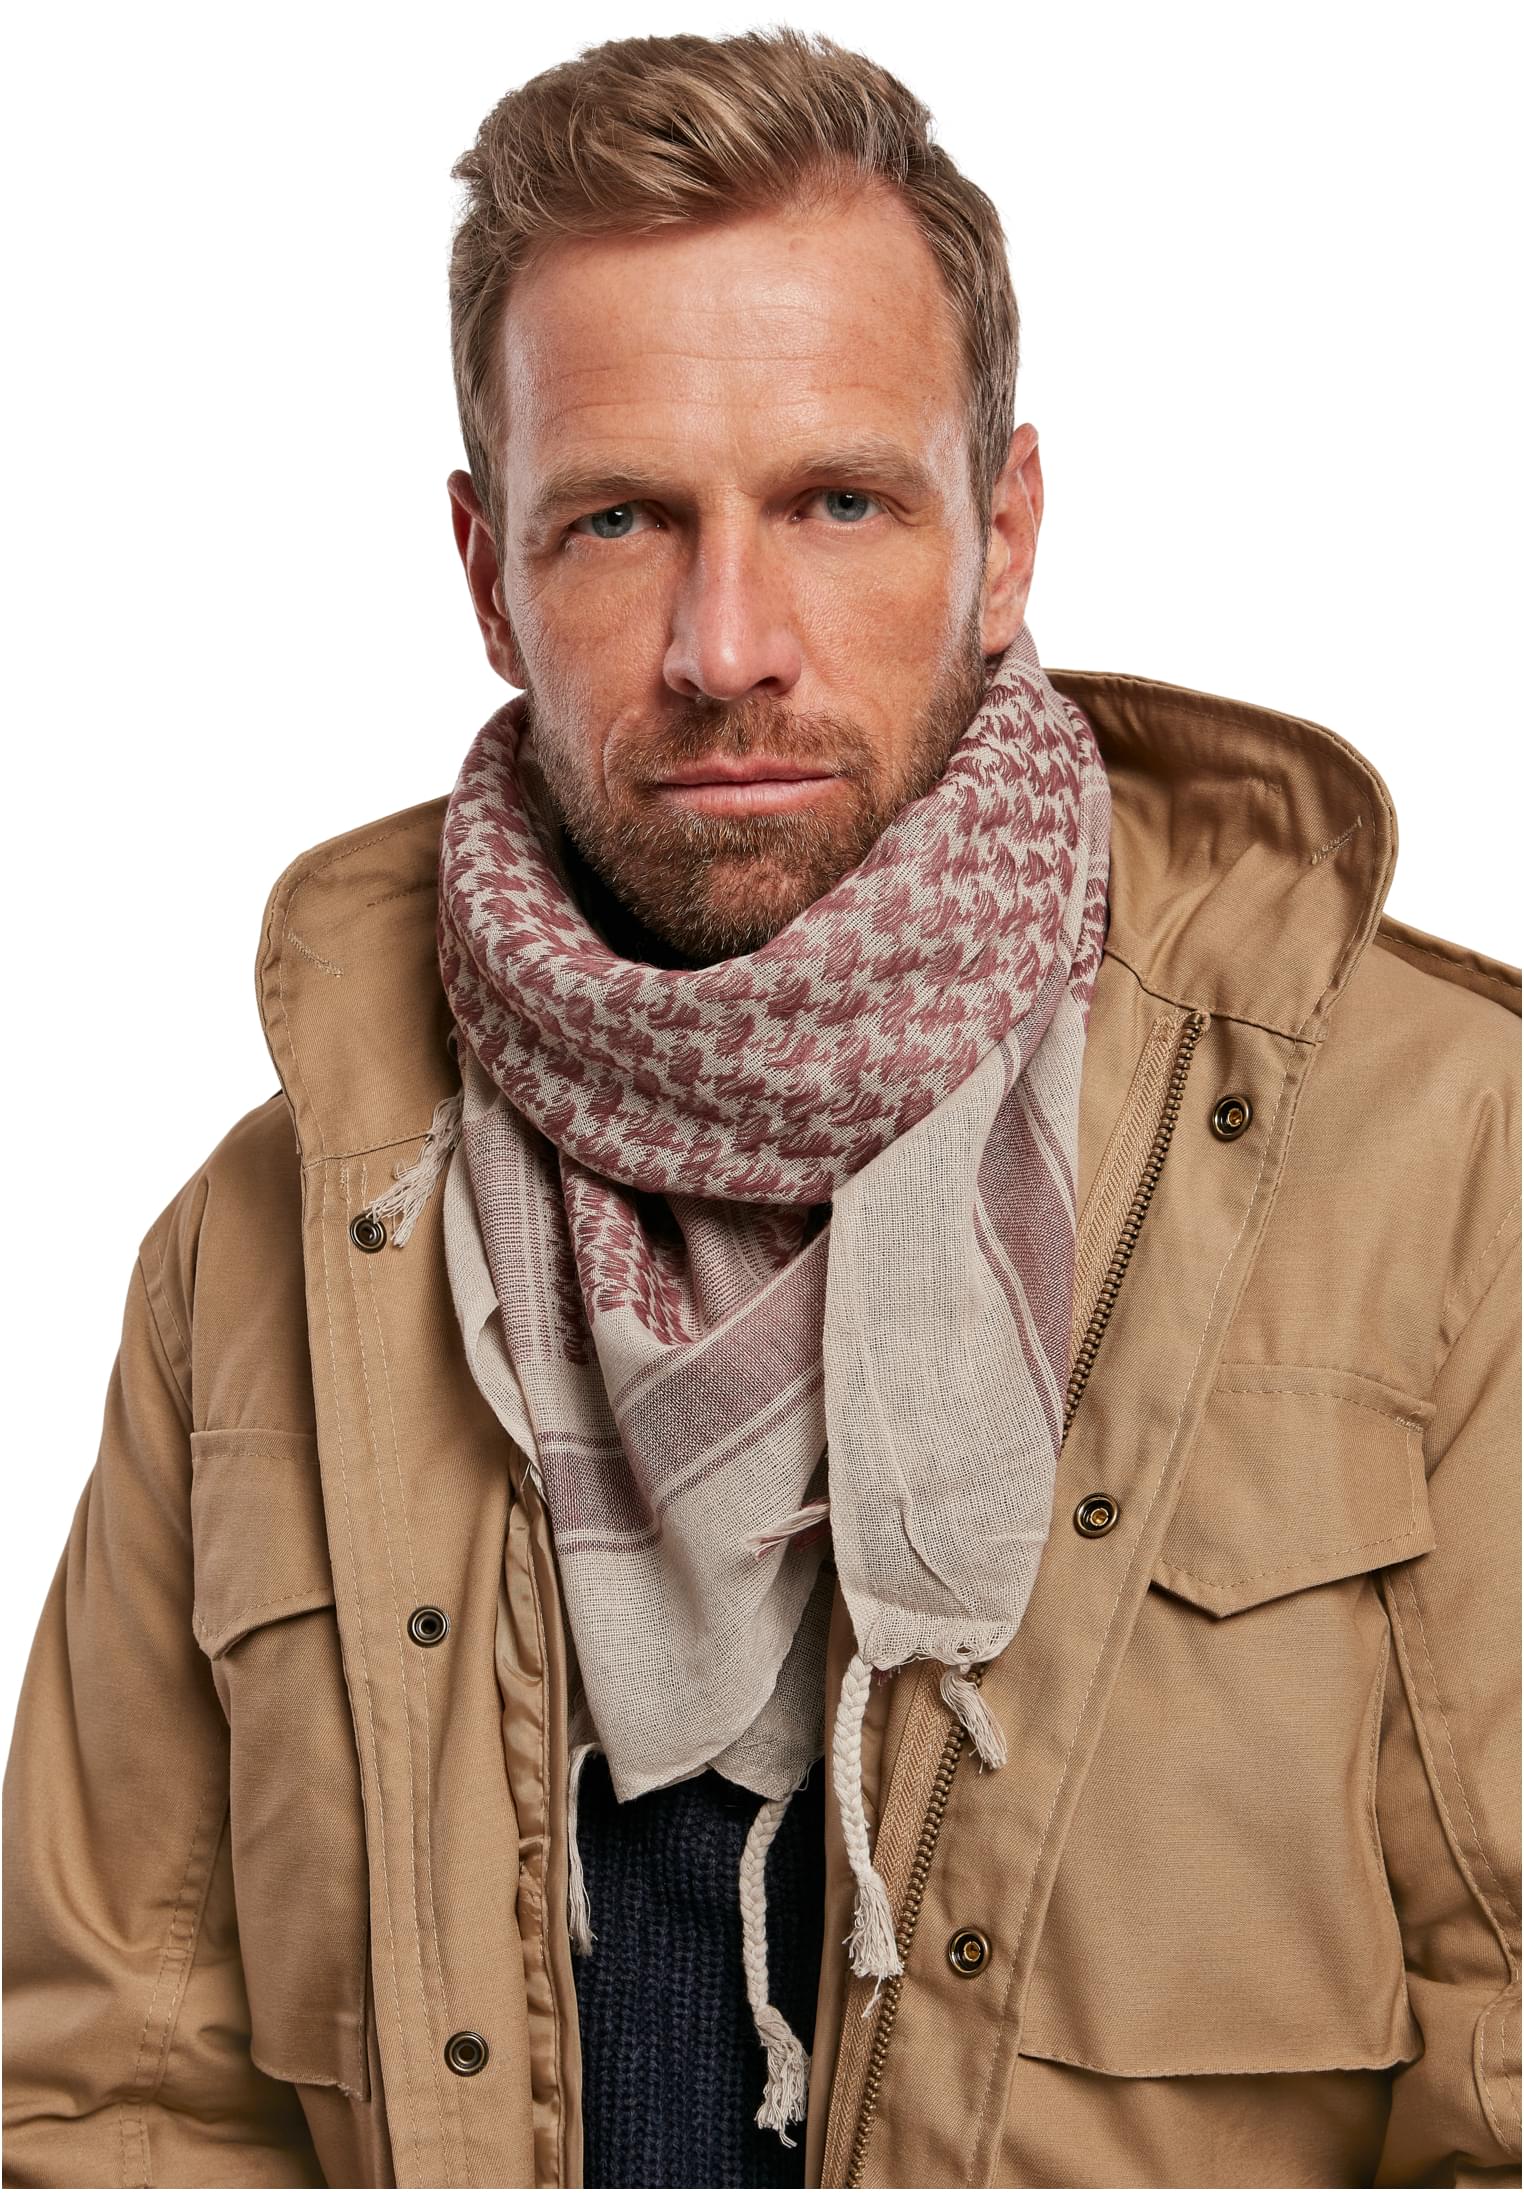 Accessoires Shemag Scarf in Farbe coyote/brown